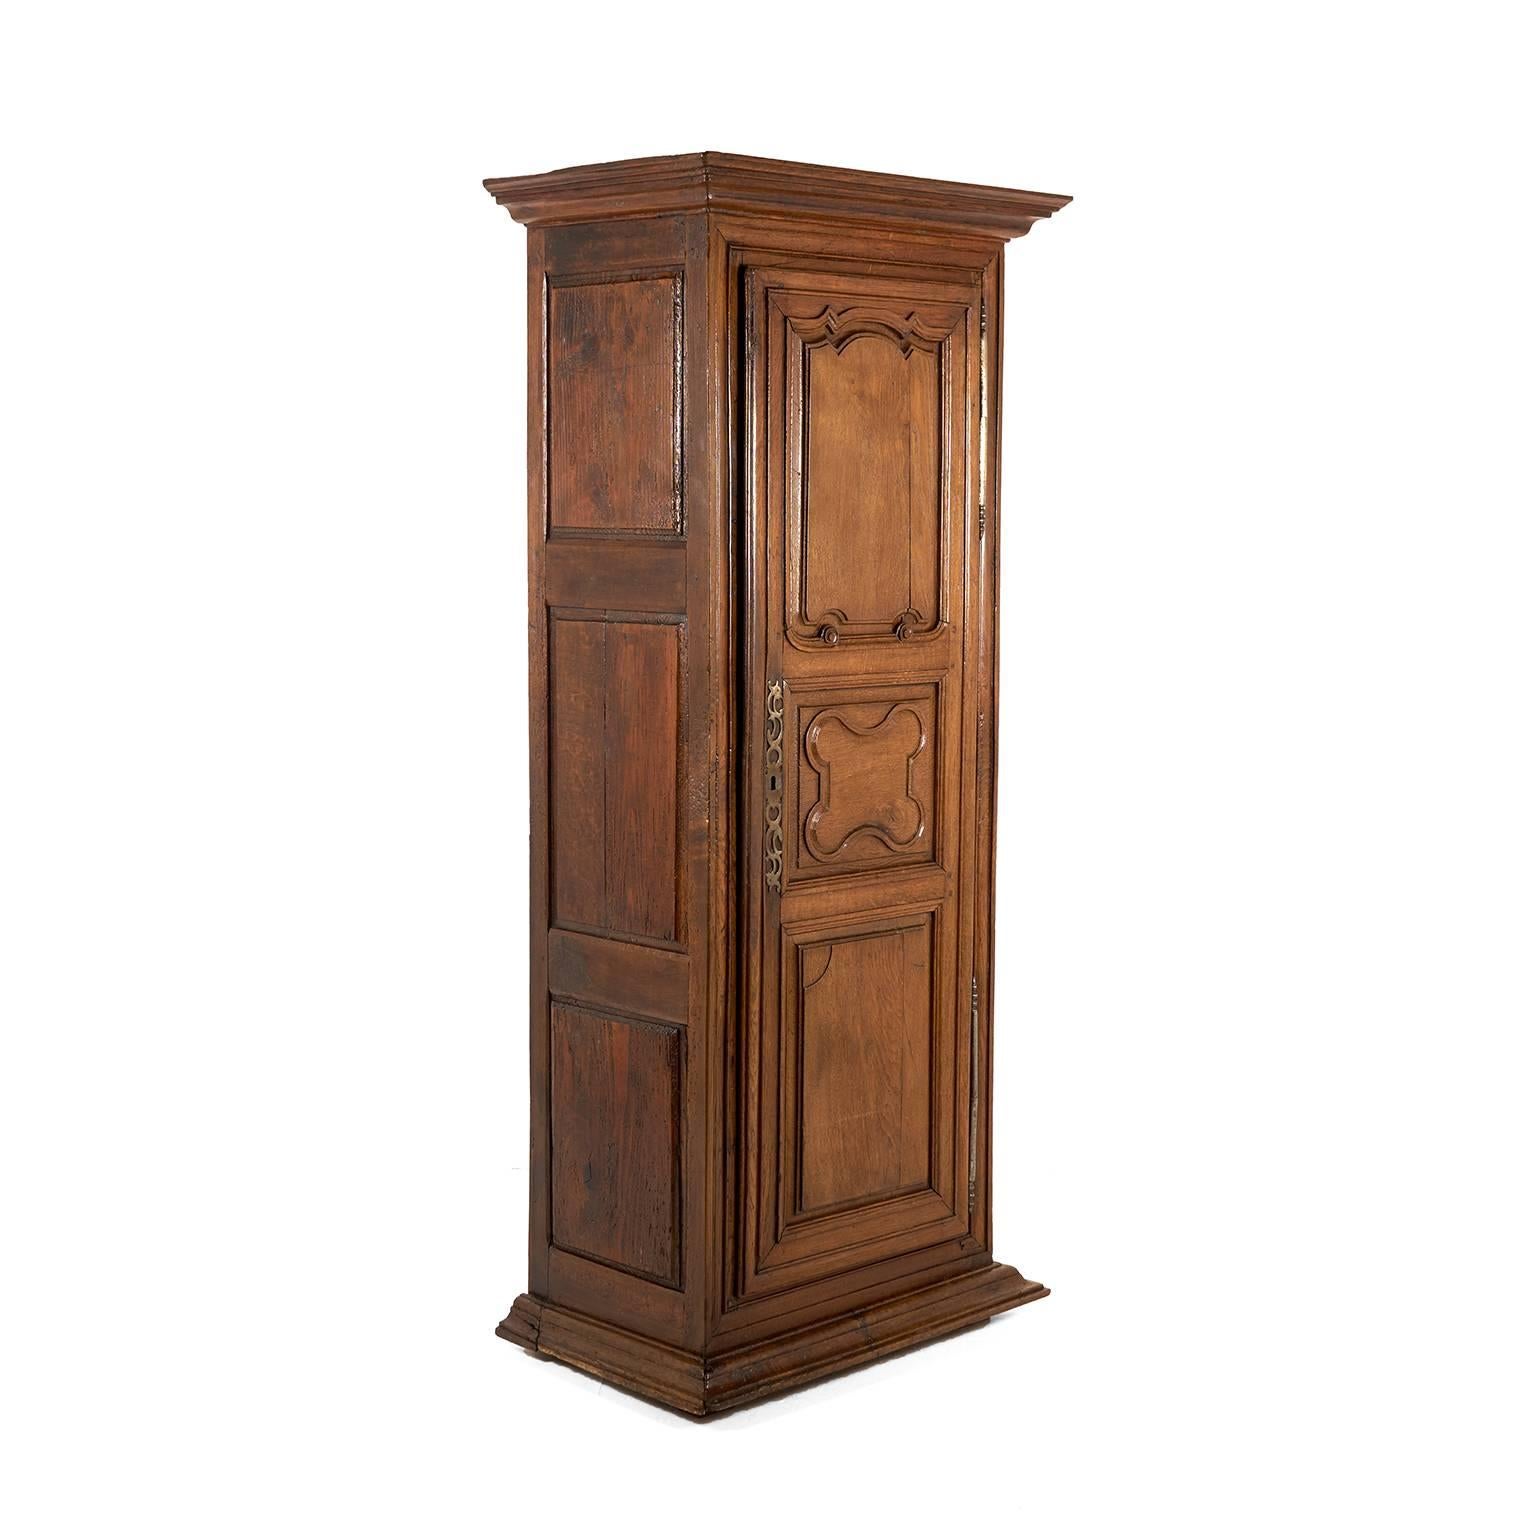 A rustic French single-door armoire or ‘bonnetiere’ with raised solid-oak paneled door and sides, and fitted with shelves and a drawer to the interior, circa 1860.


Measures: 31? wide (Top) x 22? deep (Top) x 75? tall.

